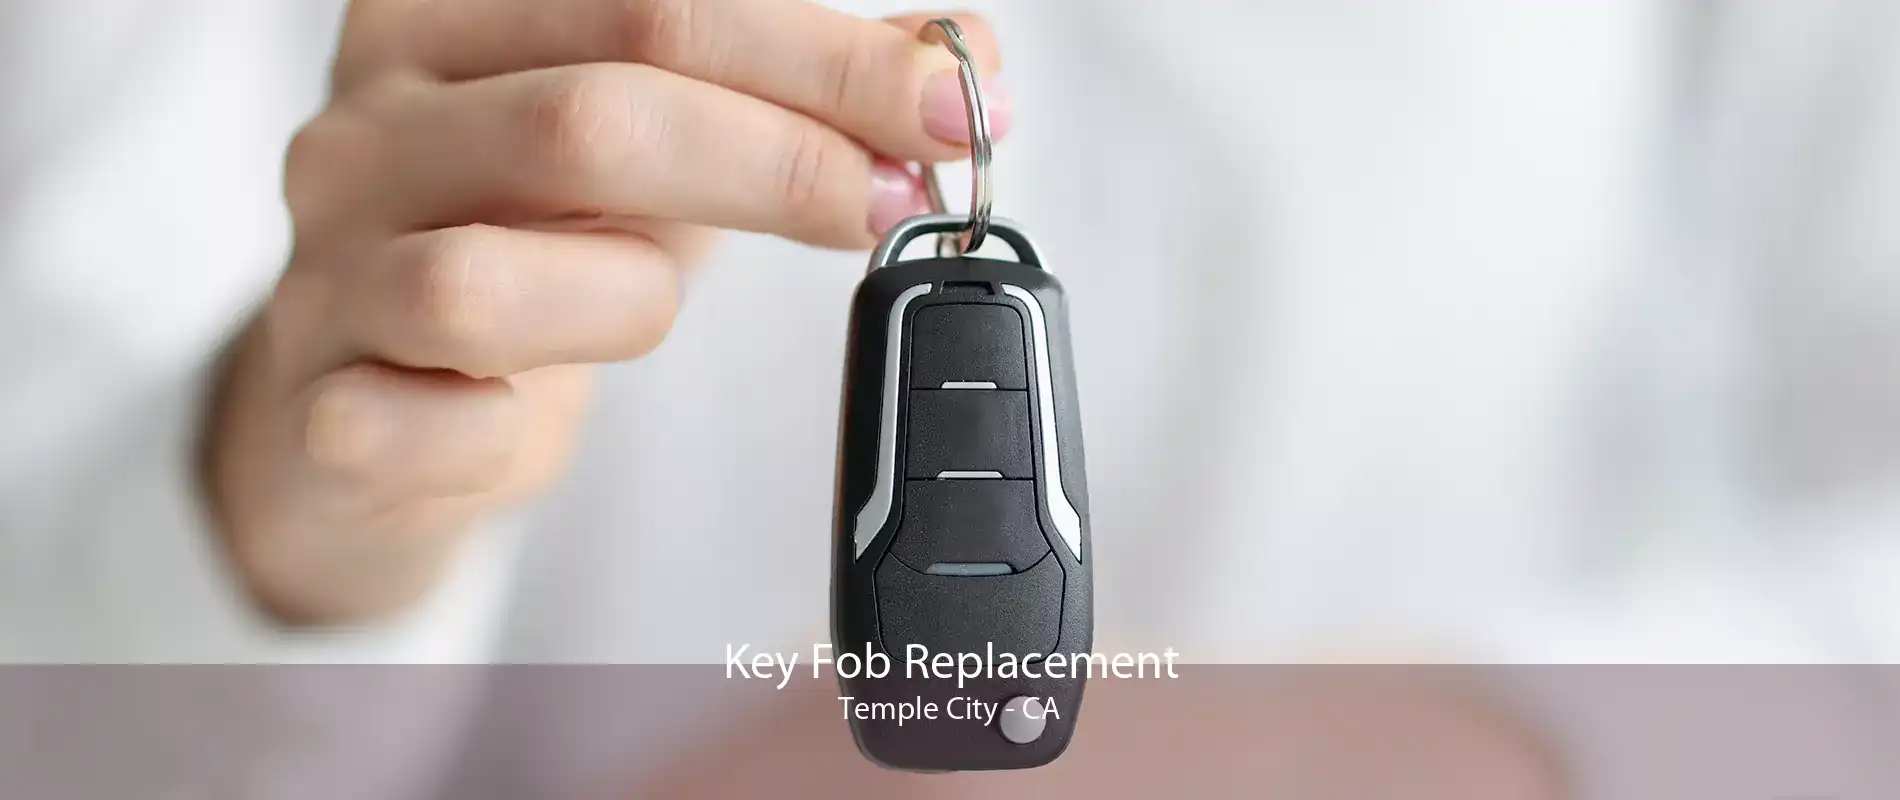 Key Fob Replacement Temple City - CA